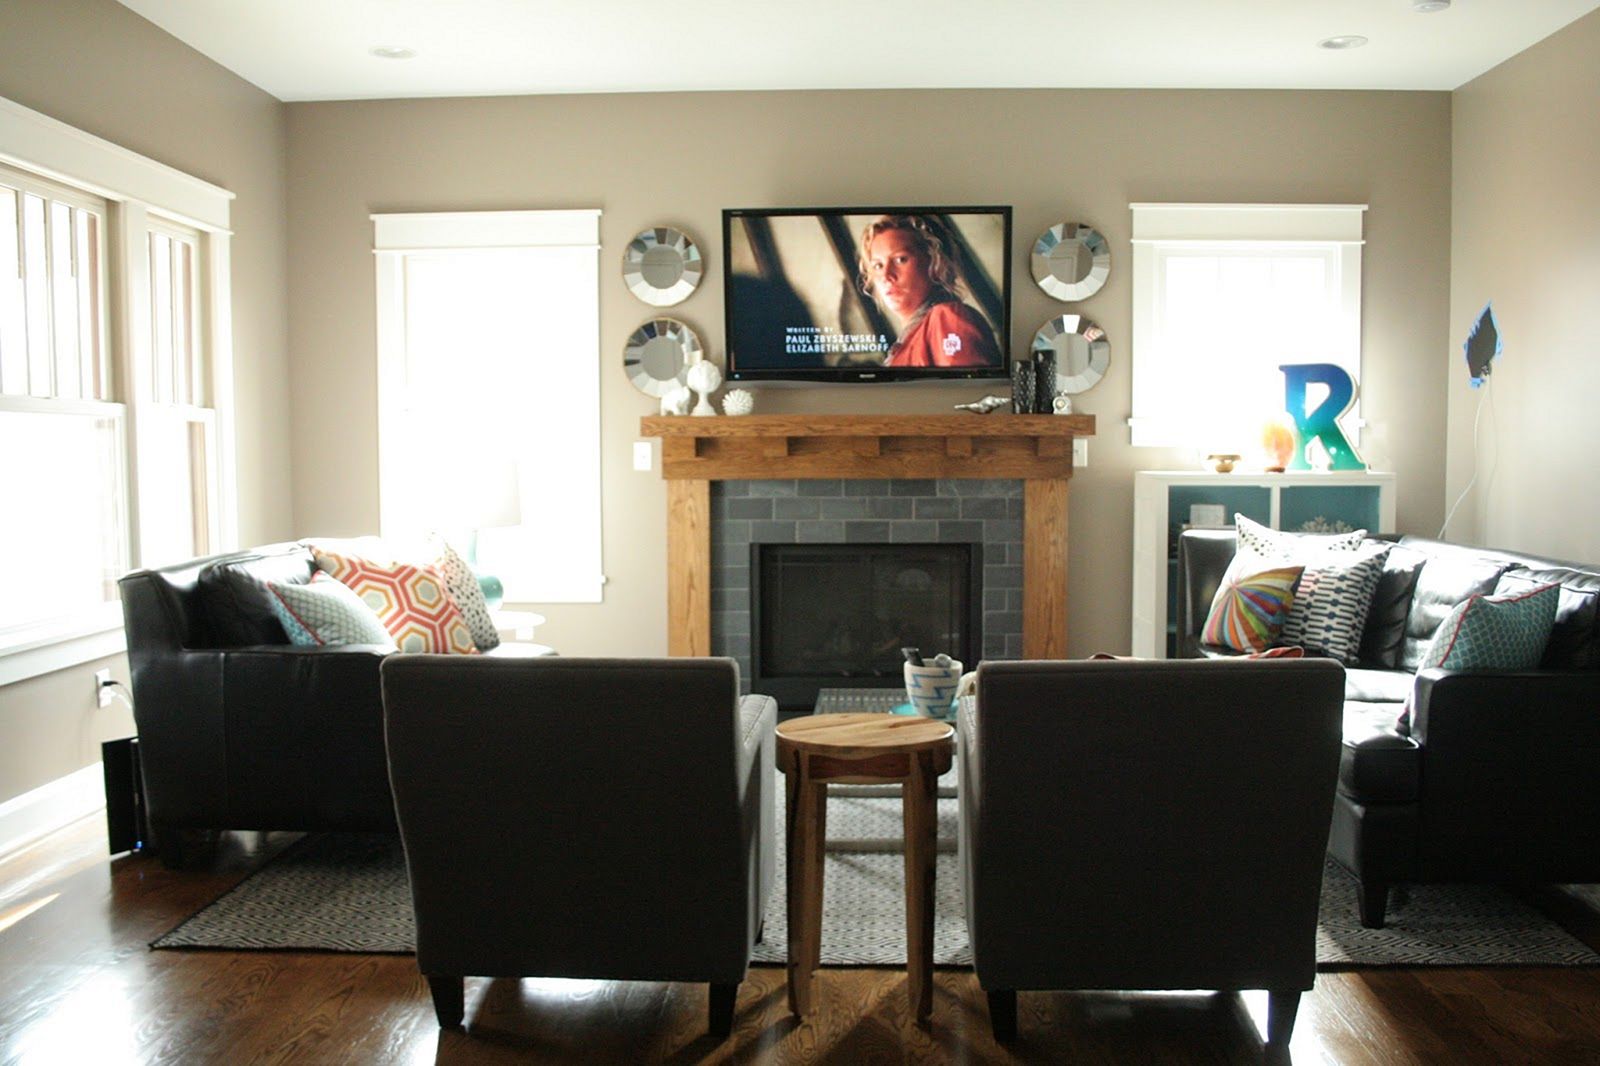  Living  Room  Layouts  With Fireplace  And TV Living  Room  